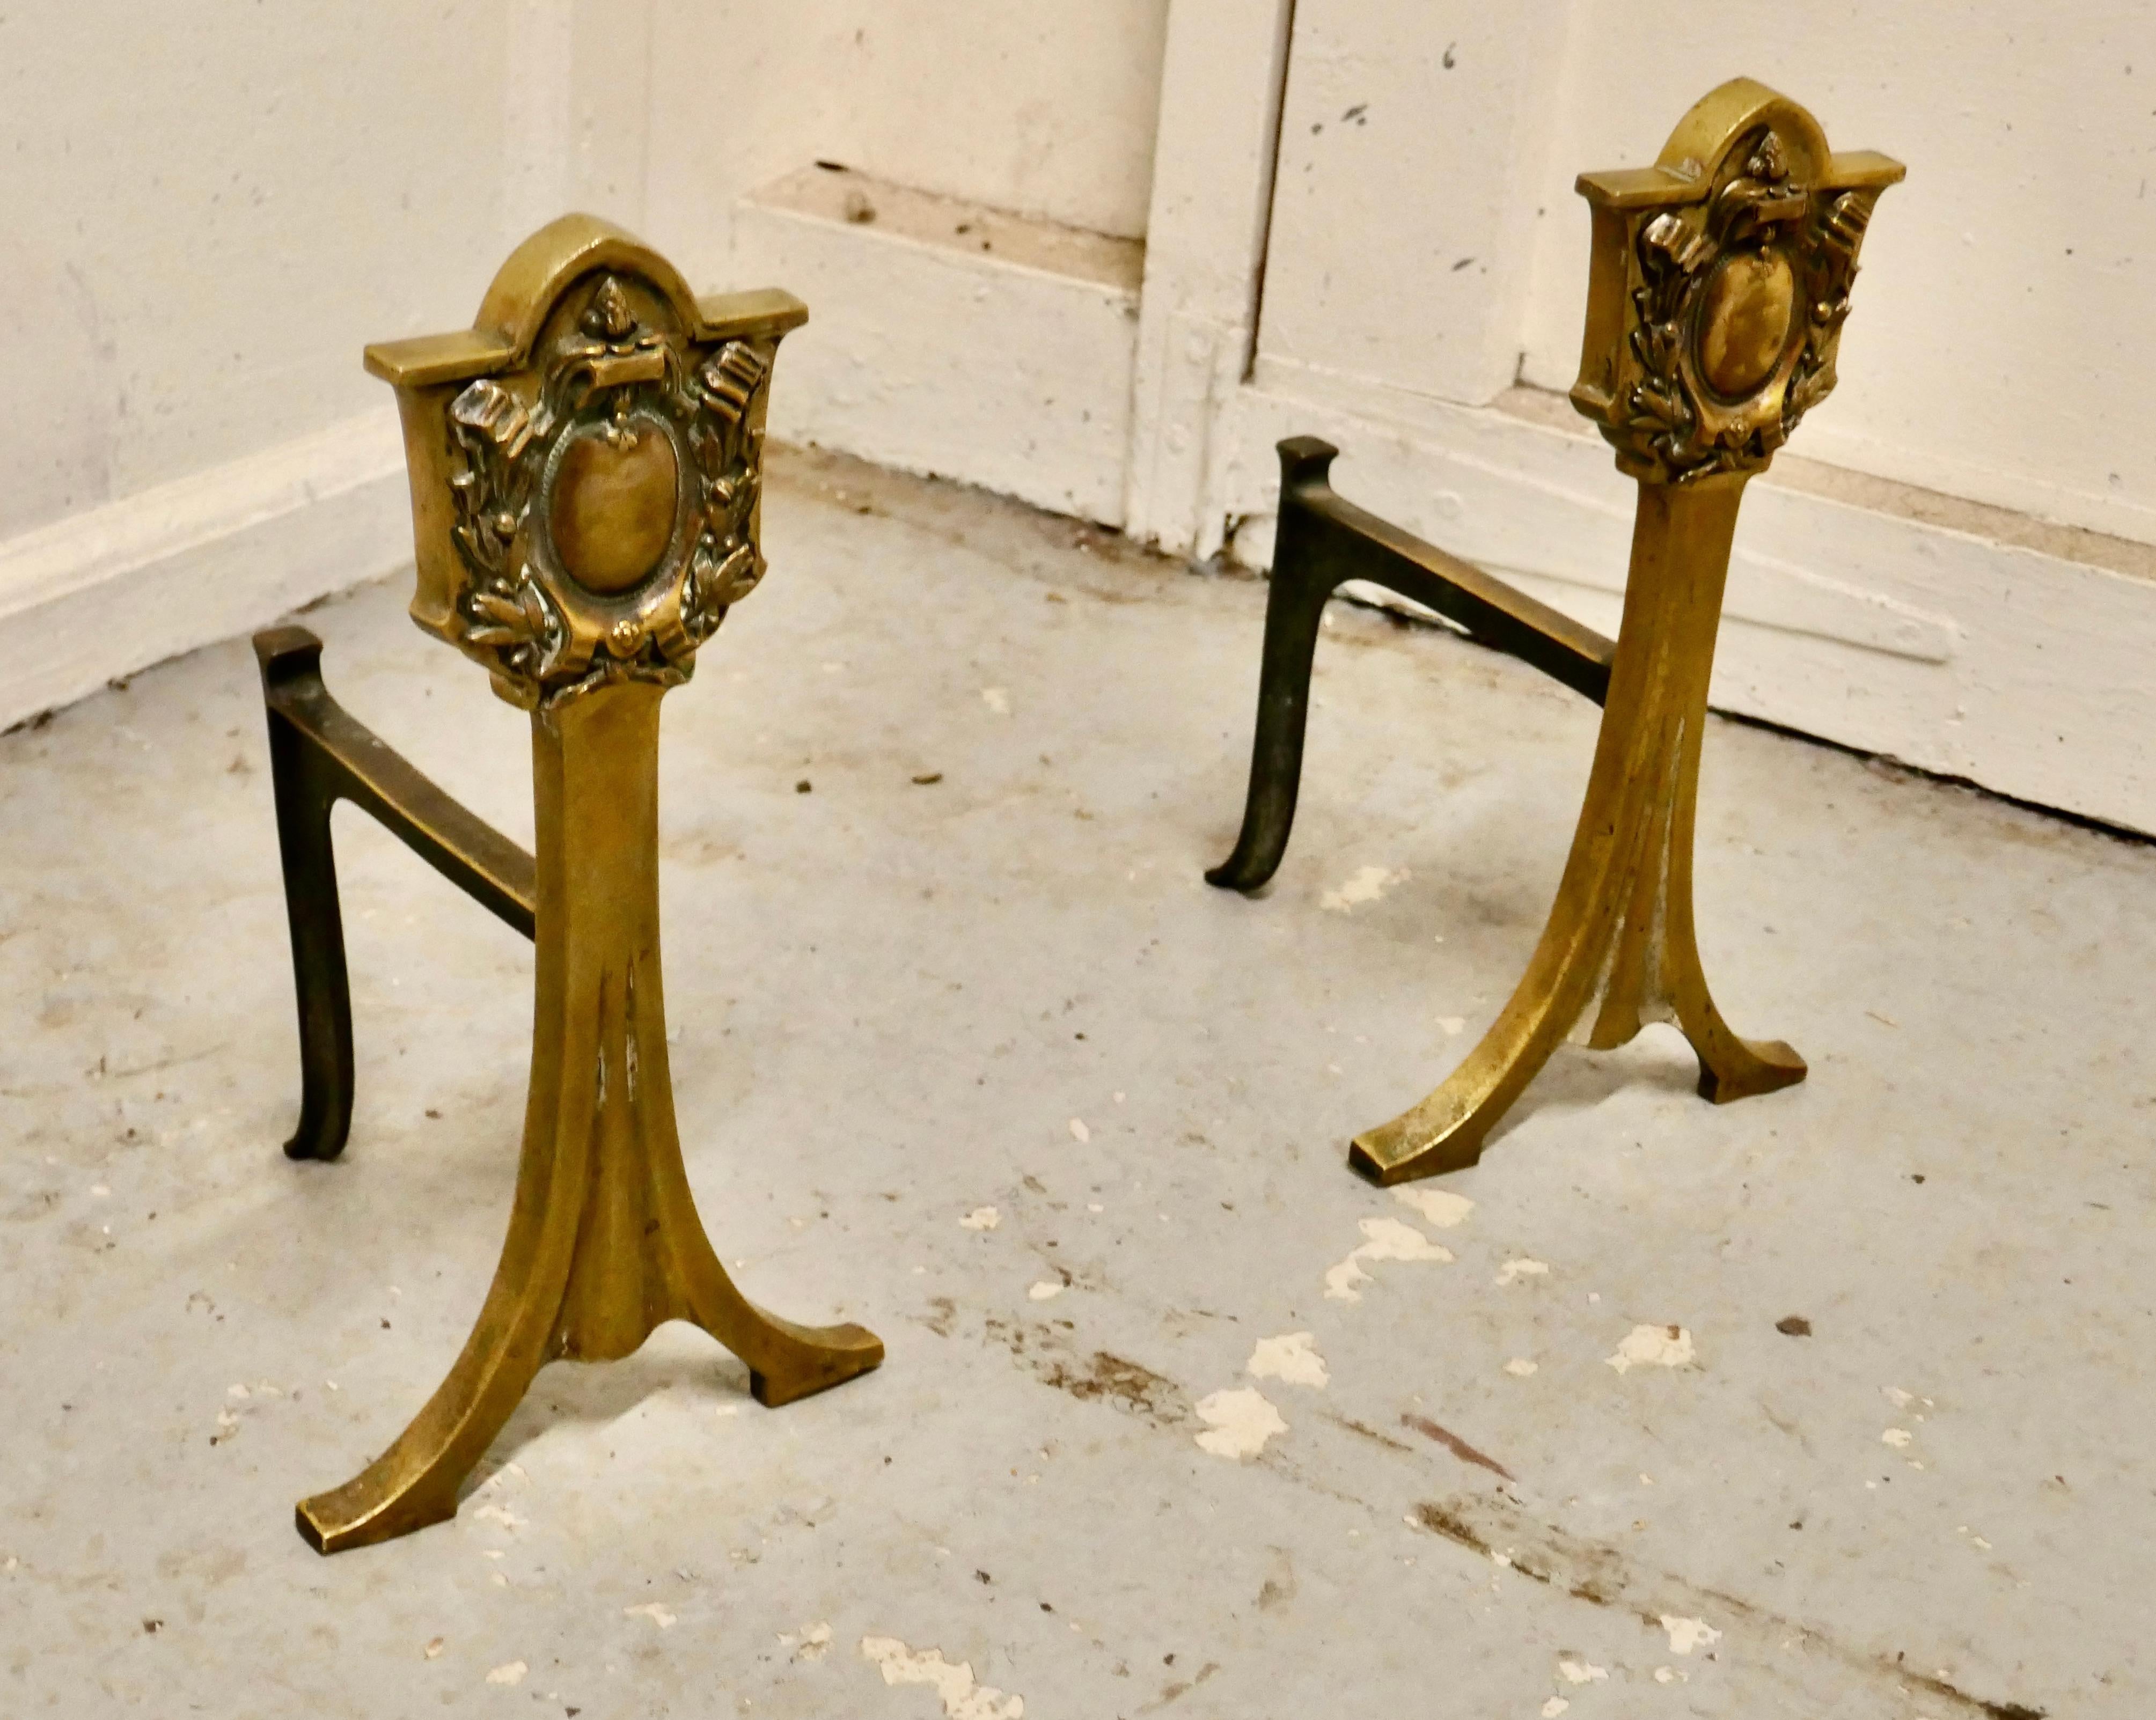 An elegant pair of 19th century brass andirons or fire dogs

This very attractive pair of brass andirons, they they are Regency in style with a classical shield on the top and splayed feet

The andirons are 12” high, 7” long and 7” wide across